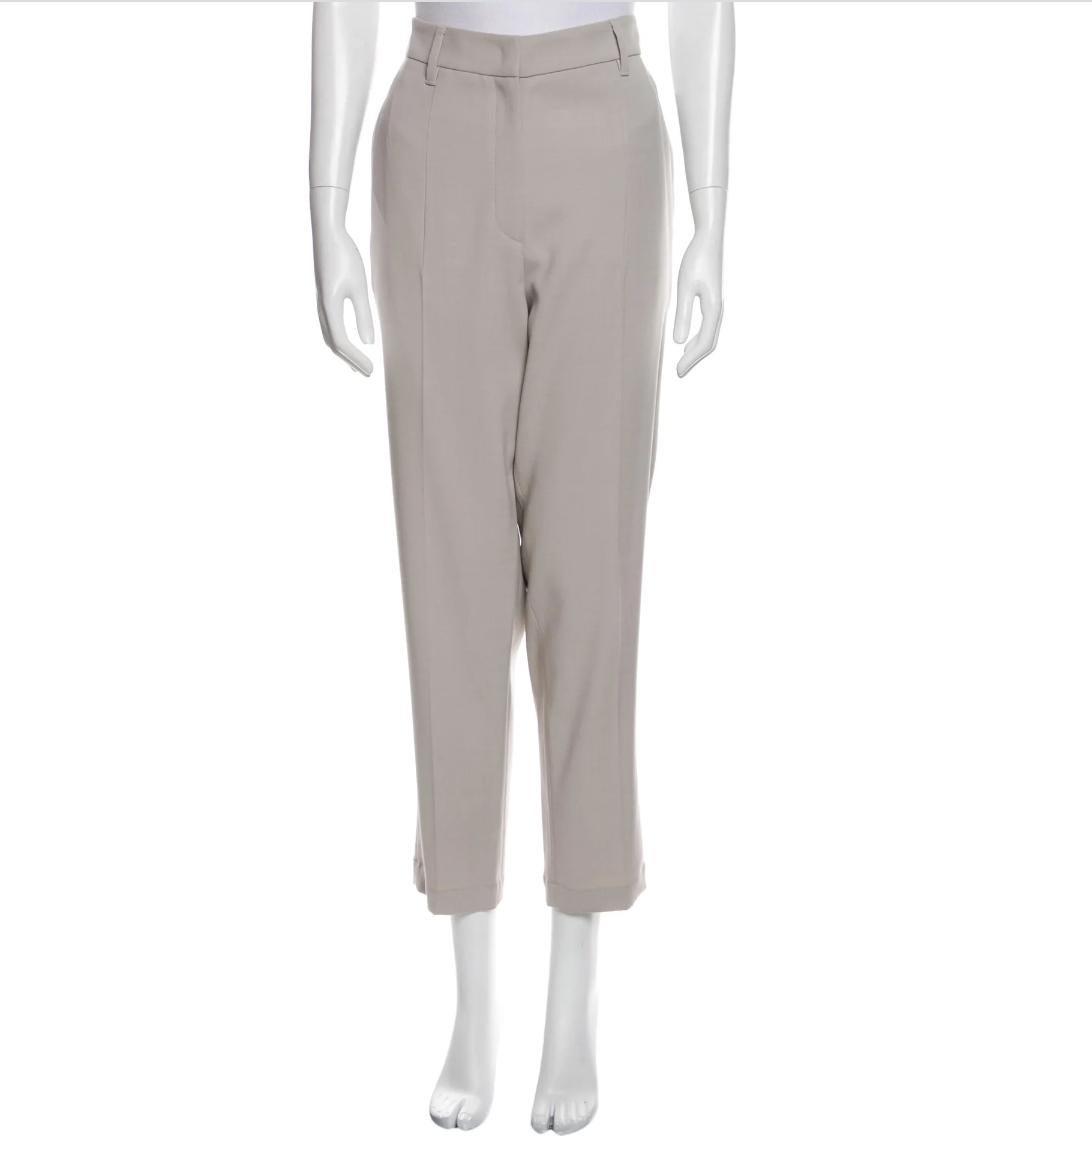 Acetate cropped straight leg pants by Brunello Cucinelli in neutral grey color. 
High-Rise
Slit Pockets
Zip & Button Closure
Size: M
Composition: 52% Acetate, 48% Silk; Lining 68% Acetate, 32% Polyester
Measurements: